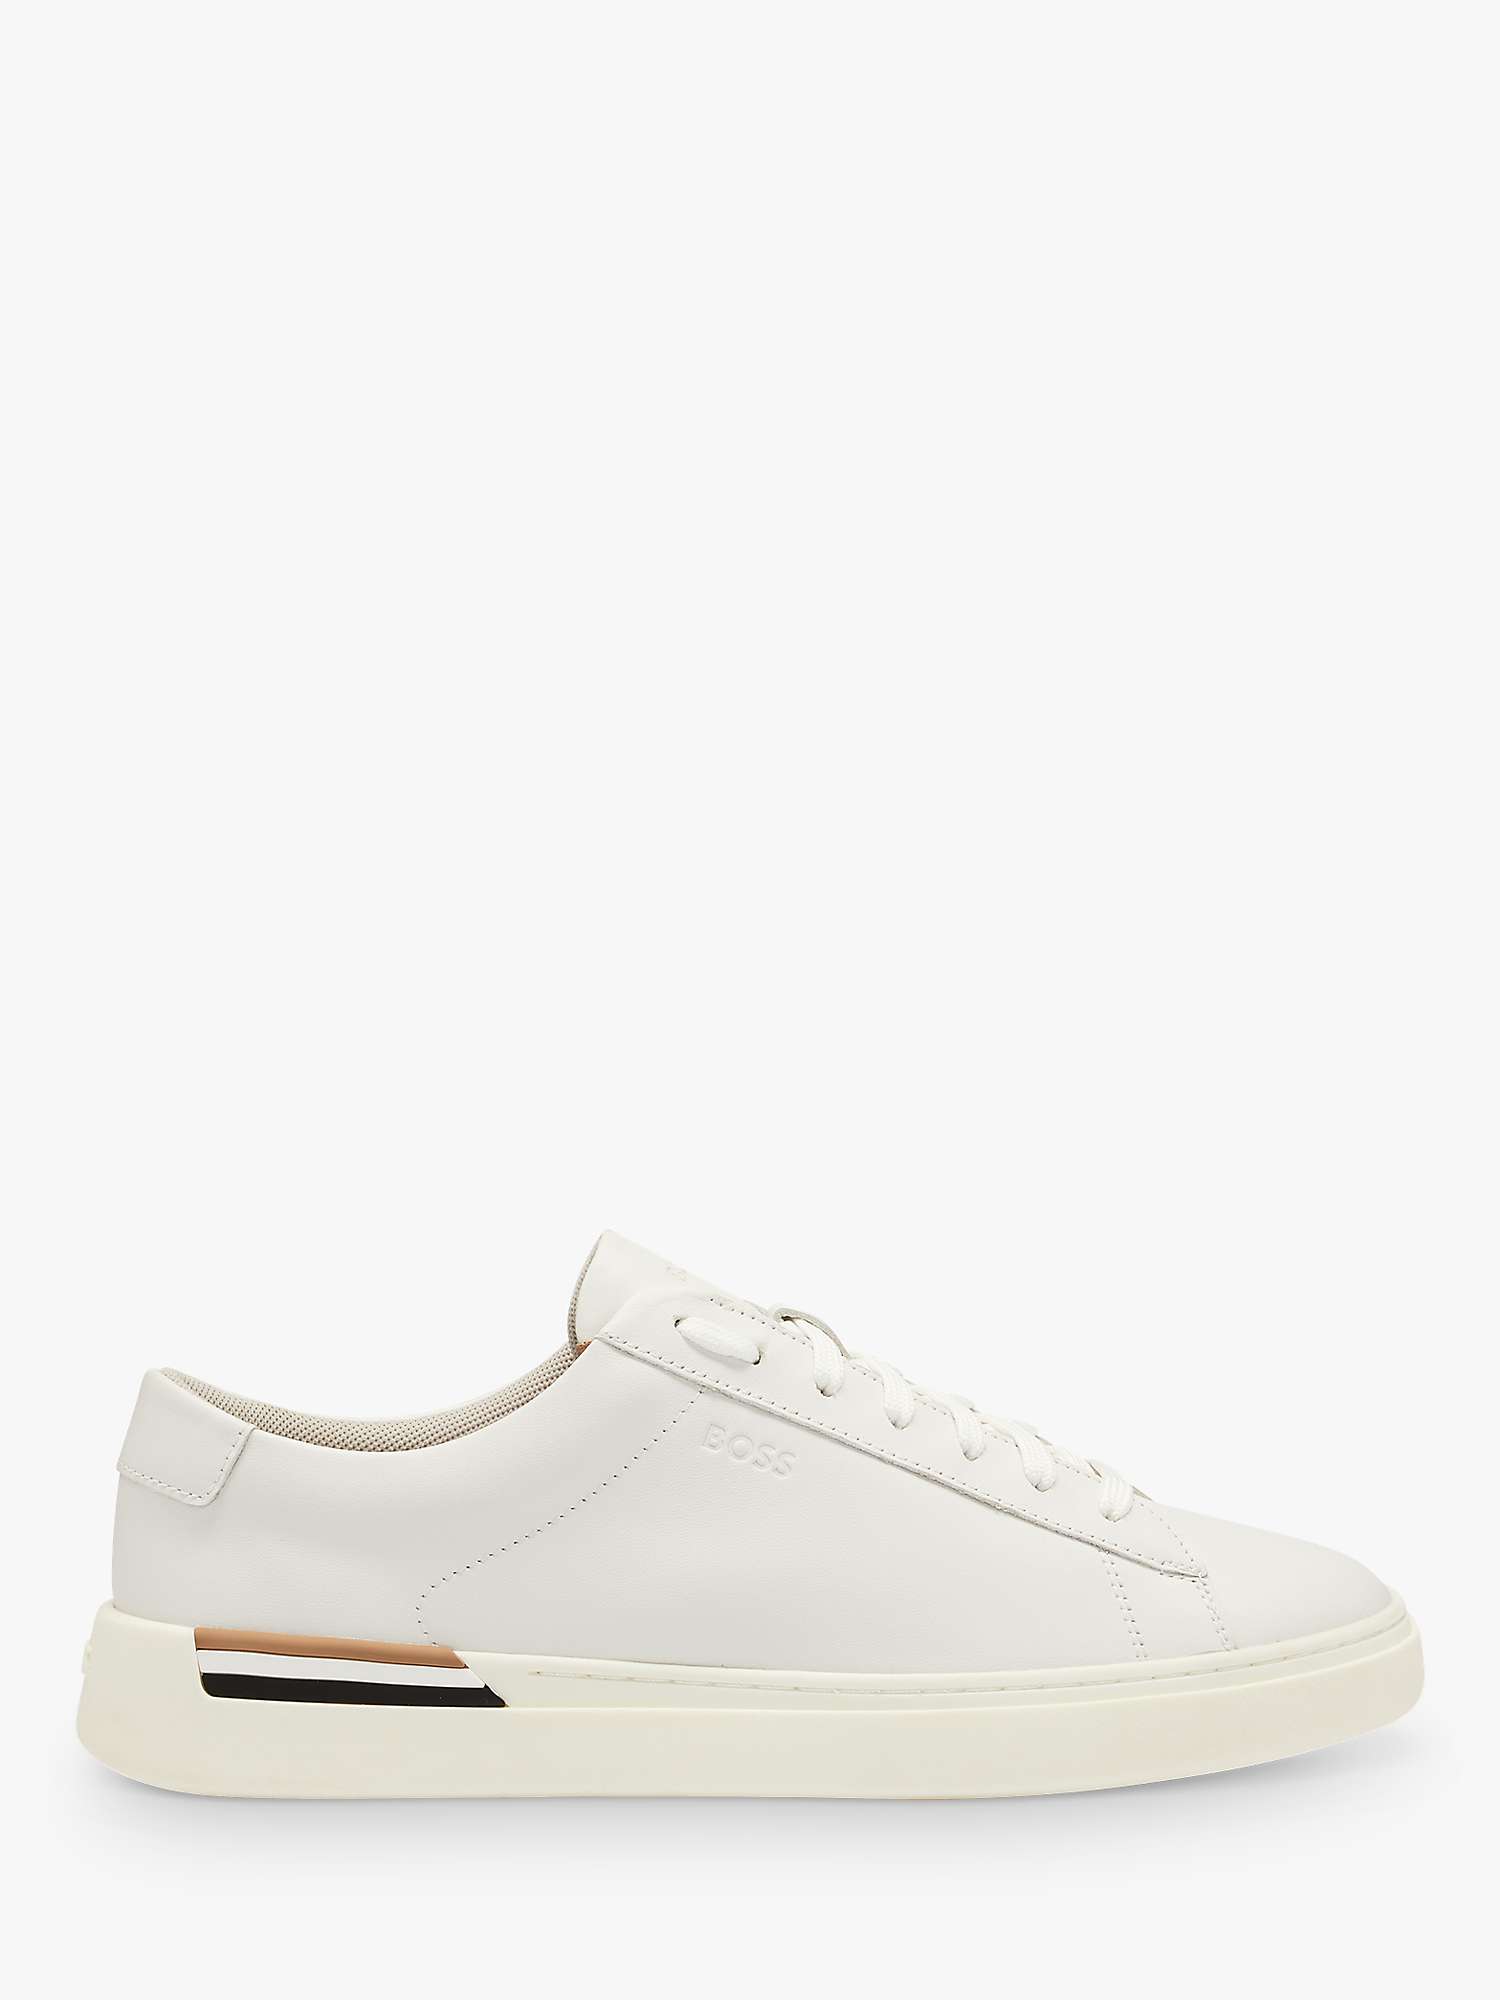 Buy BOSS Clint Lace Up Trainers, White Online at johnlewis.com